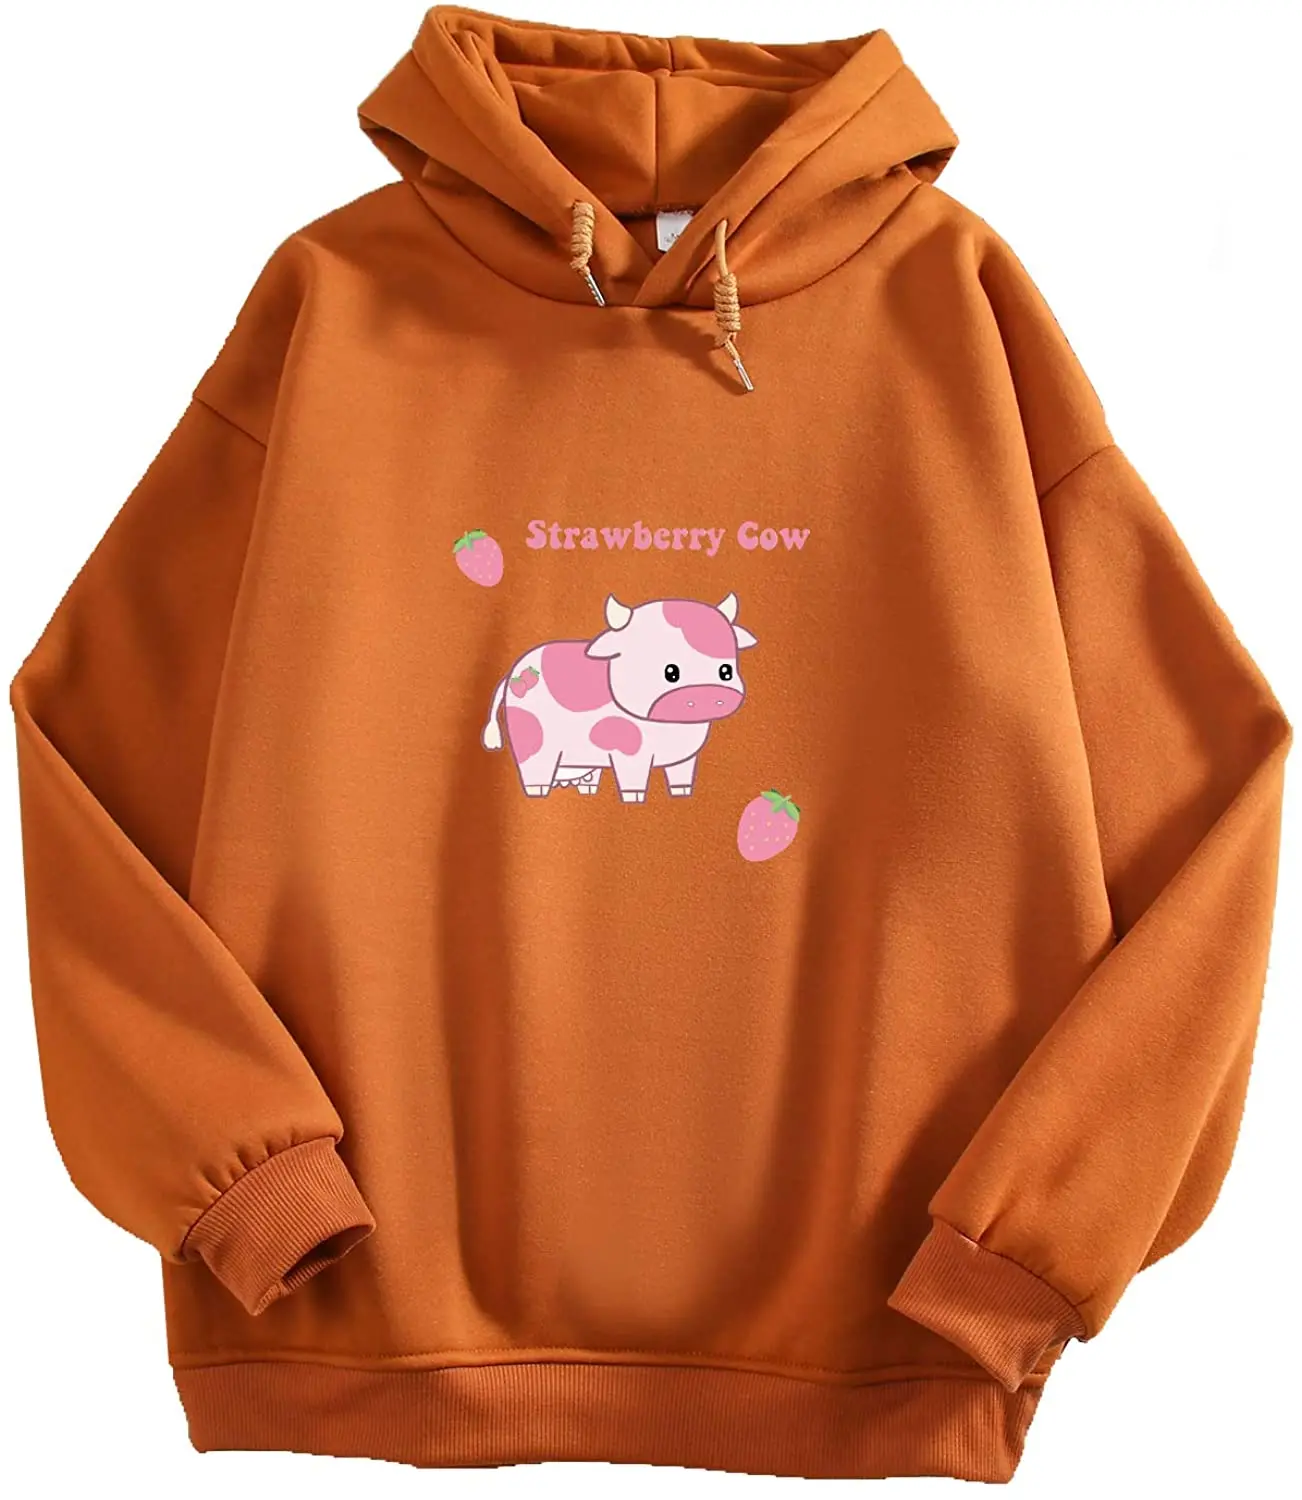 Pullover Sweatshirts for Women Cute Strawberry Cow Print Hoodie Casual Fuzzy Top 